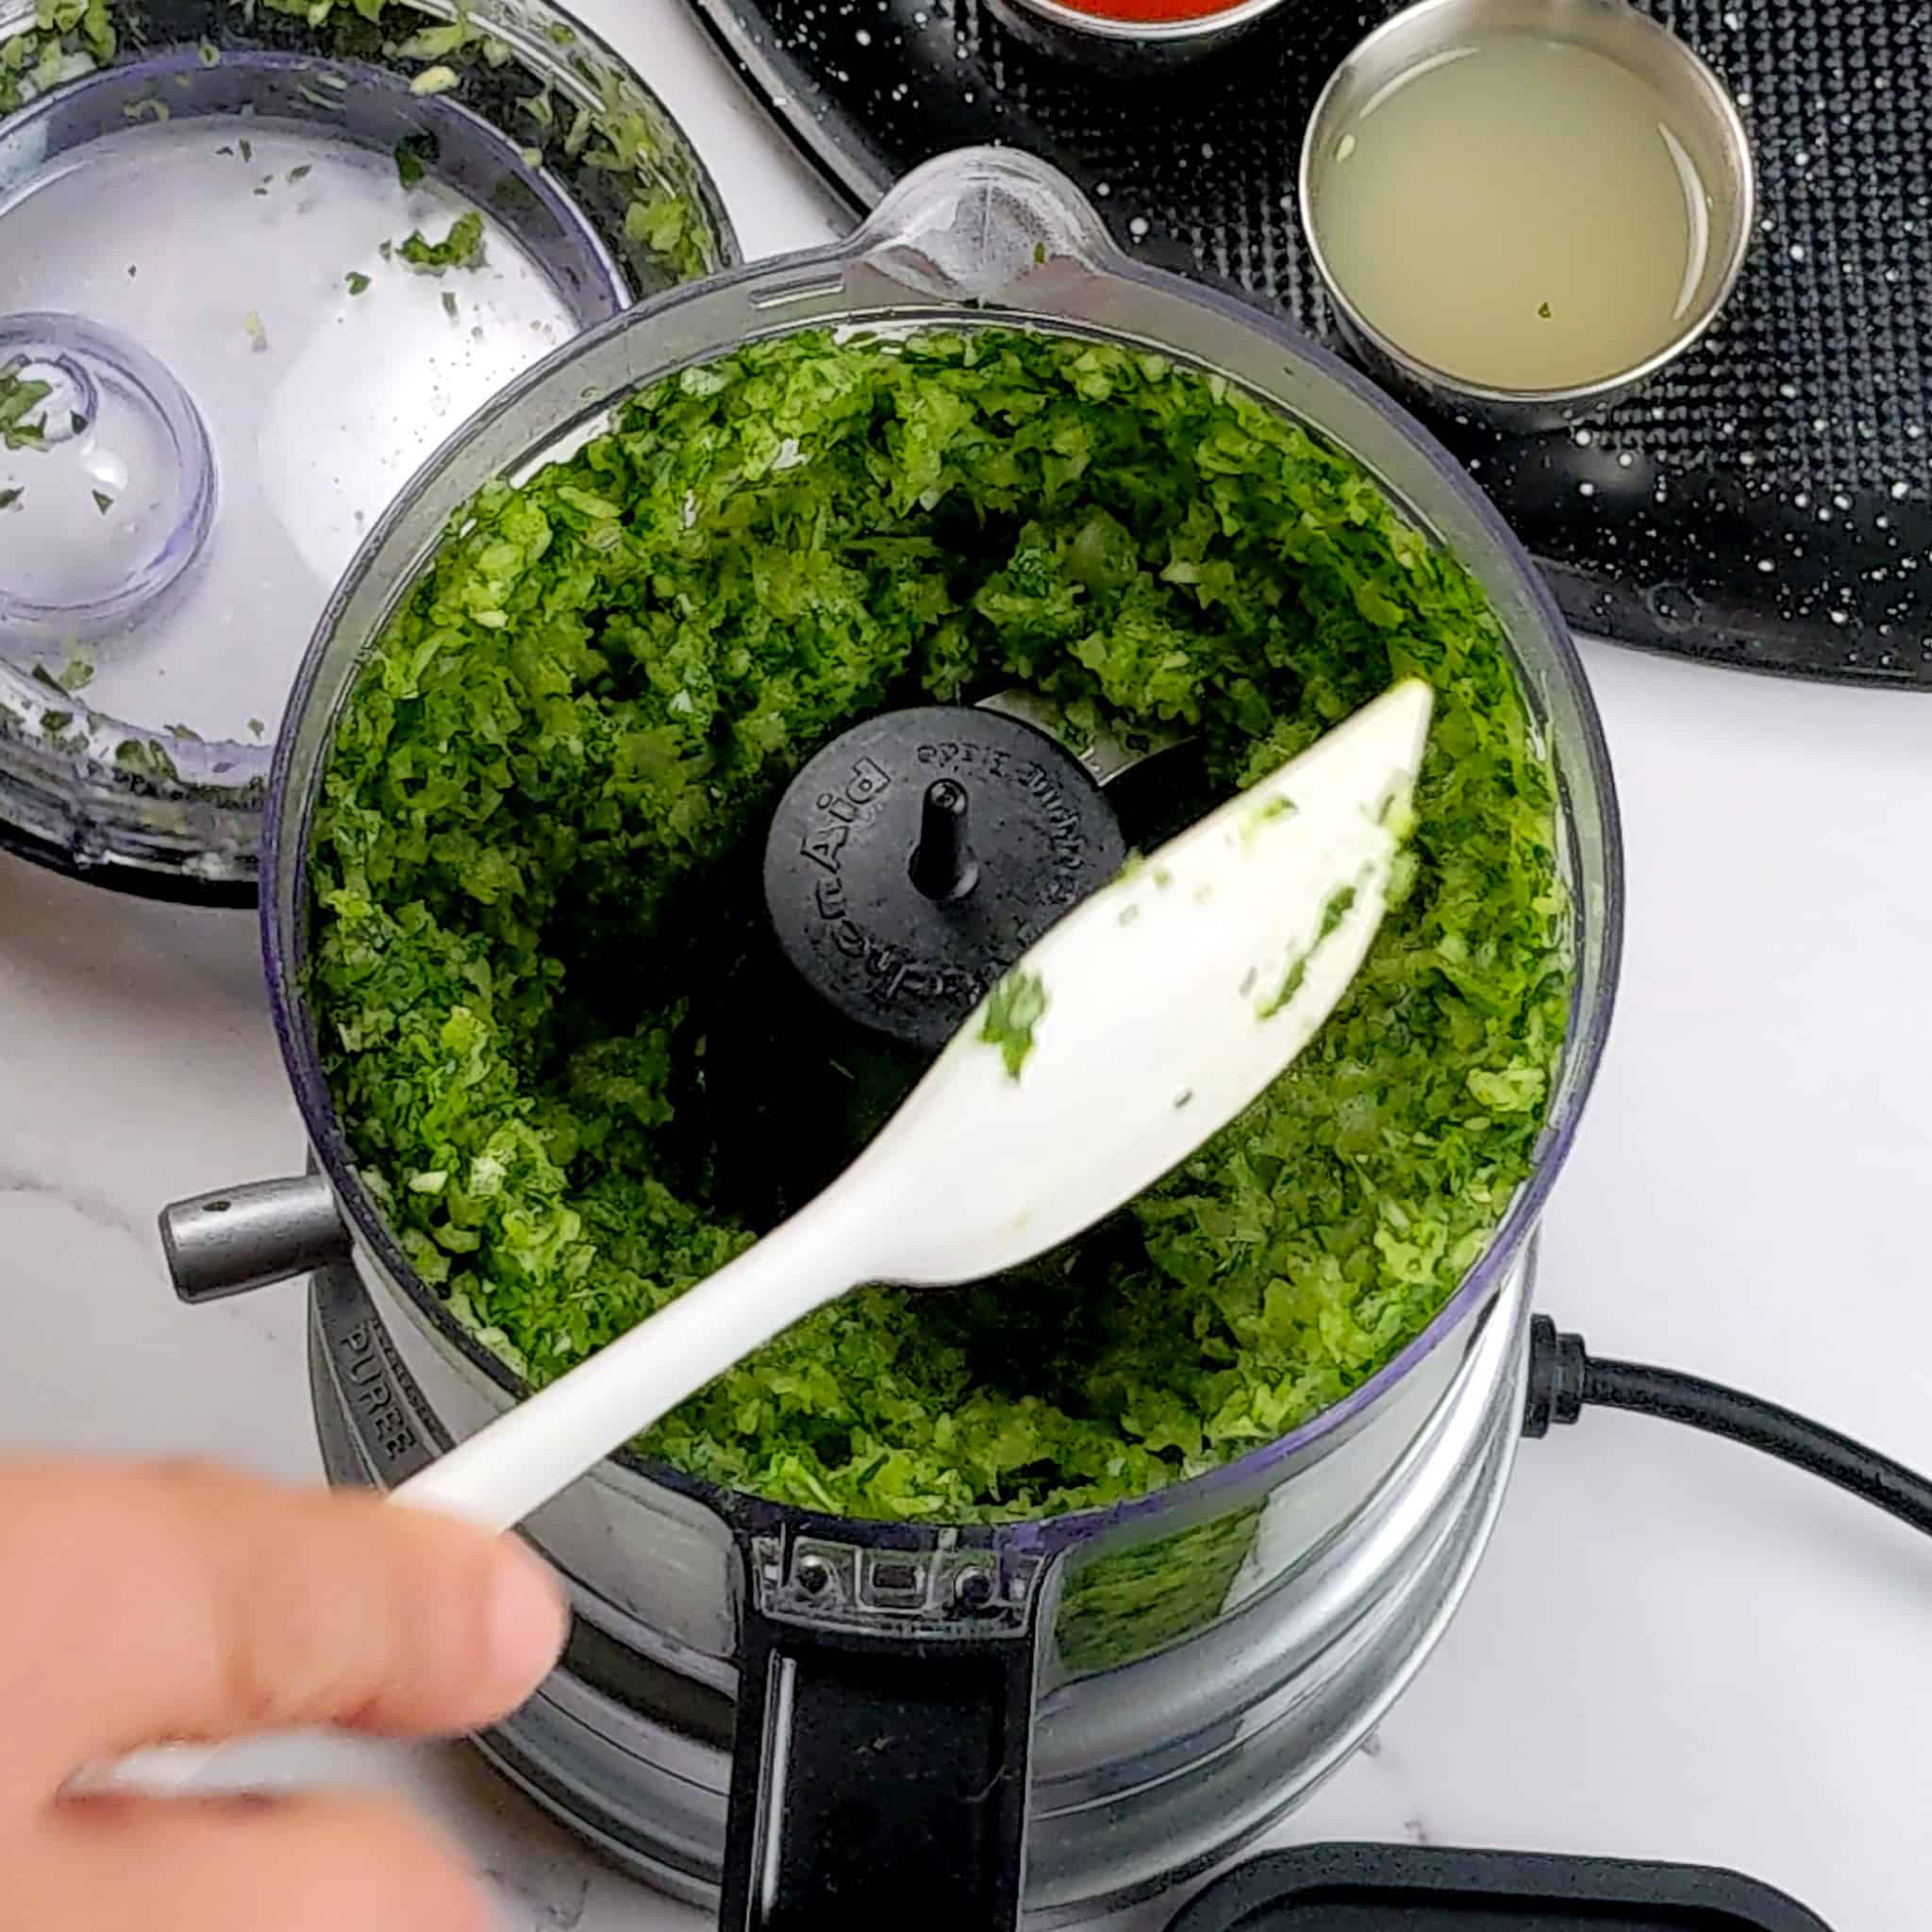 blended herbs, onion and garlic in a food processor being scrapped down with a small silicone spatula.